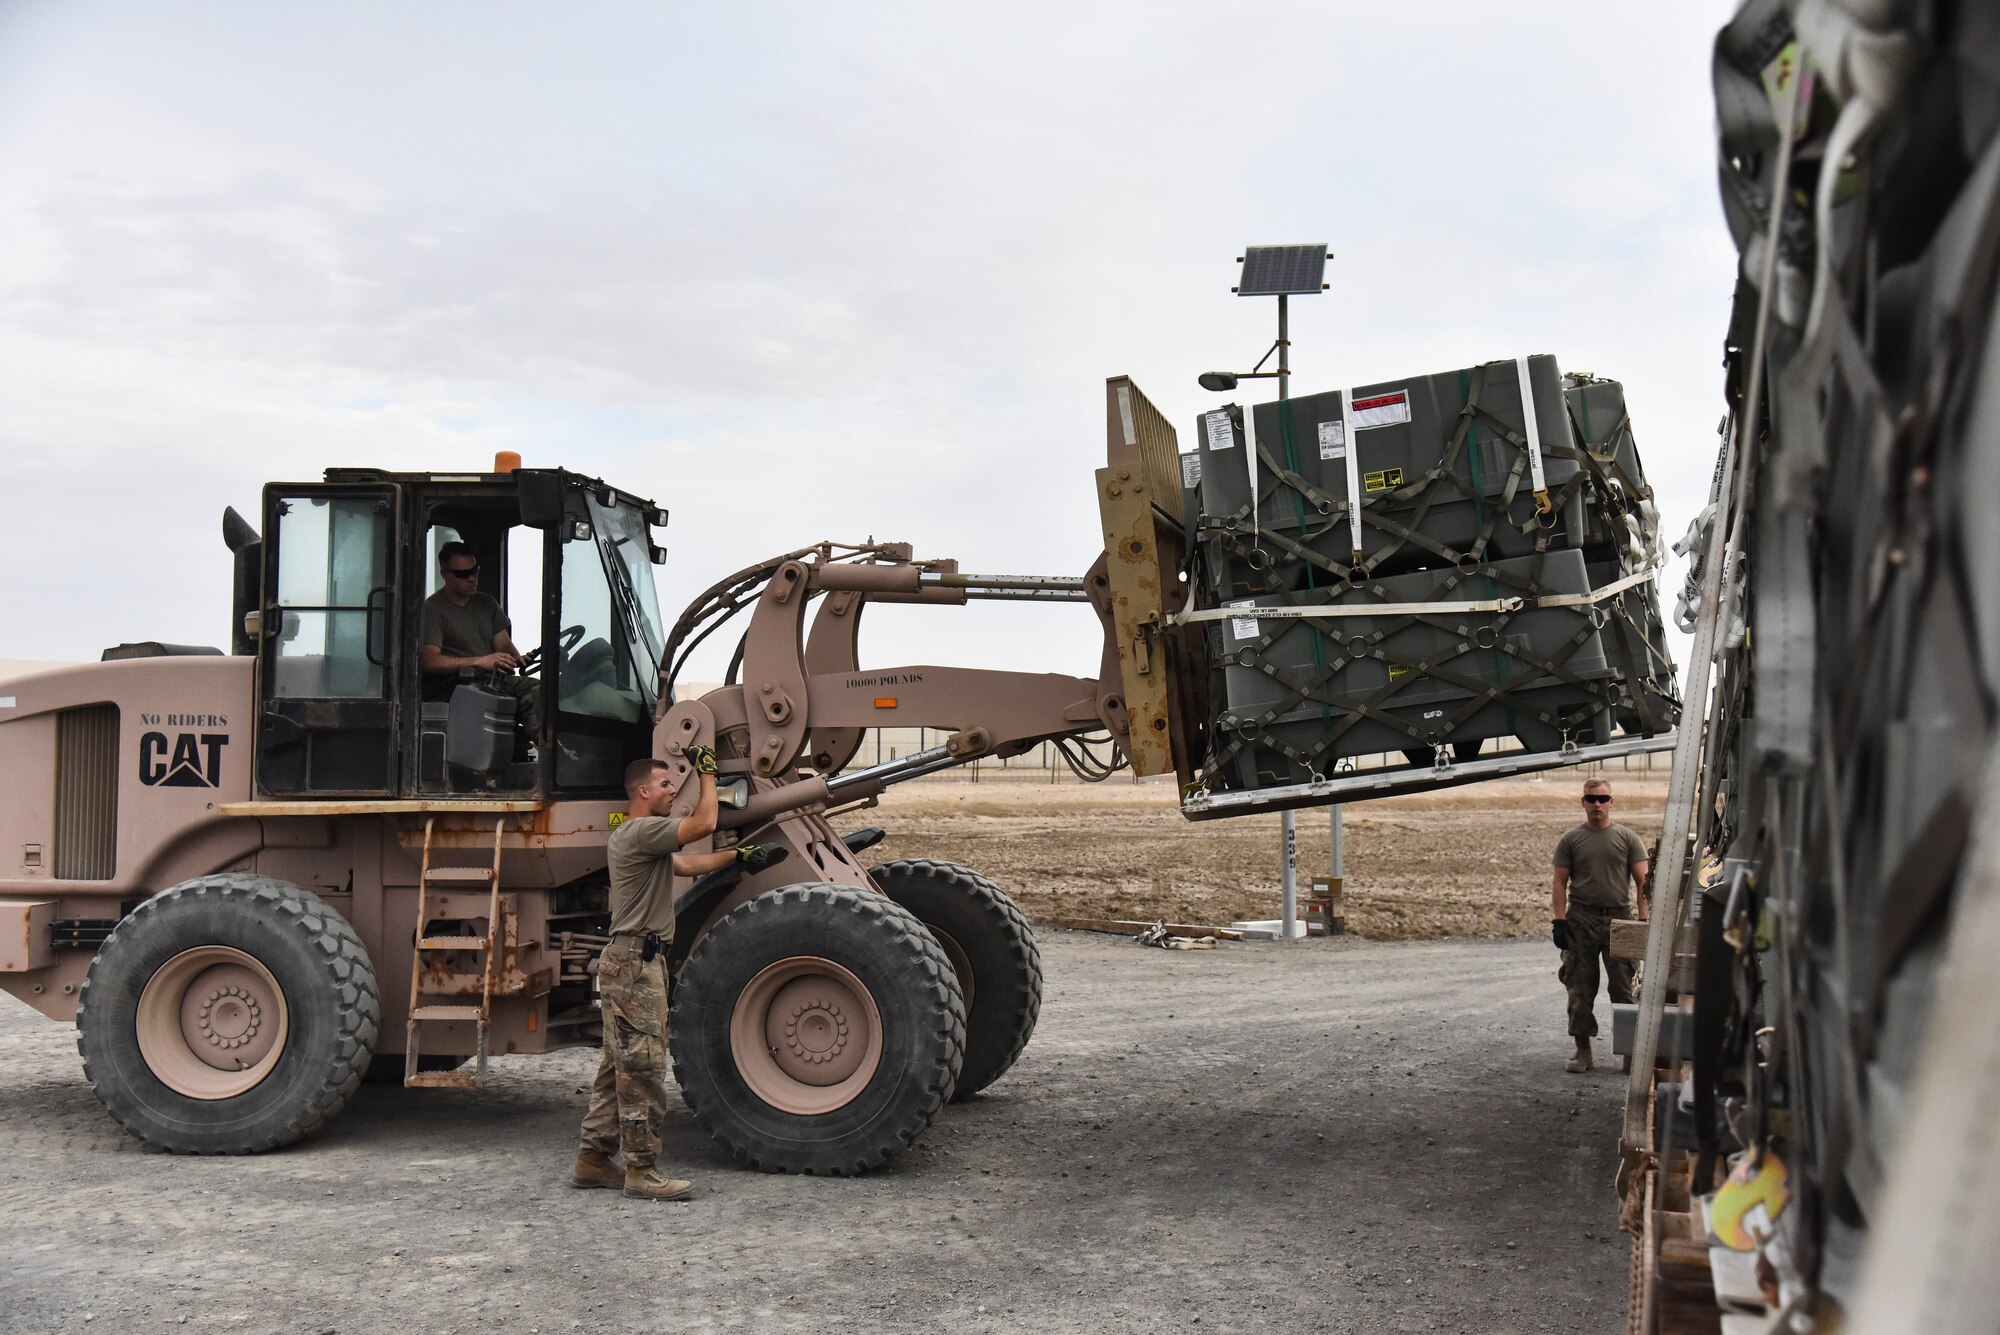 Airmen assigned to the 380th Expeditionary Maintenance Squadron munitions flight, load guiding sections at Al Dhafra Air Base, United Arab Emirates, Feb. 15, 2019. The 380th EMXS munitions flight, also known as Ammo flight, is a 10-man team has heavily supported the 380th Expeditionary Civil Engineer Squadron Explosive Ordnance Disposal flight, 380th Expeditionary Security Forces Squadron K-9 unit, Army Search and Rescue, Navy SEAL Teams, Coalition Forces and host nation forces through the U.S. Central Command’s area of responsibility. (U.S. Air Force photo by Senior Airman Mya M. Crosby)